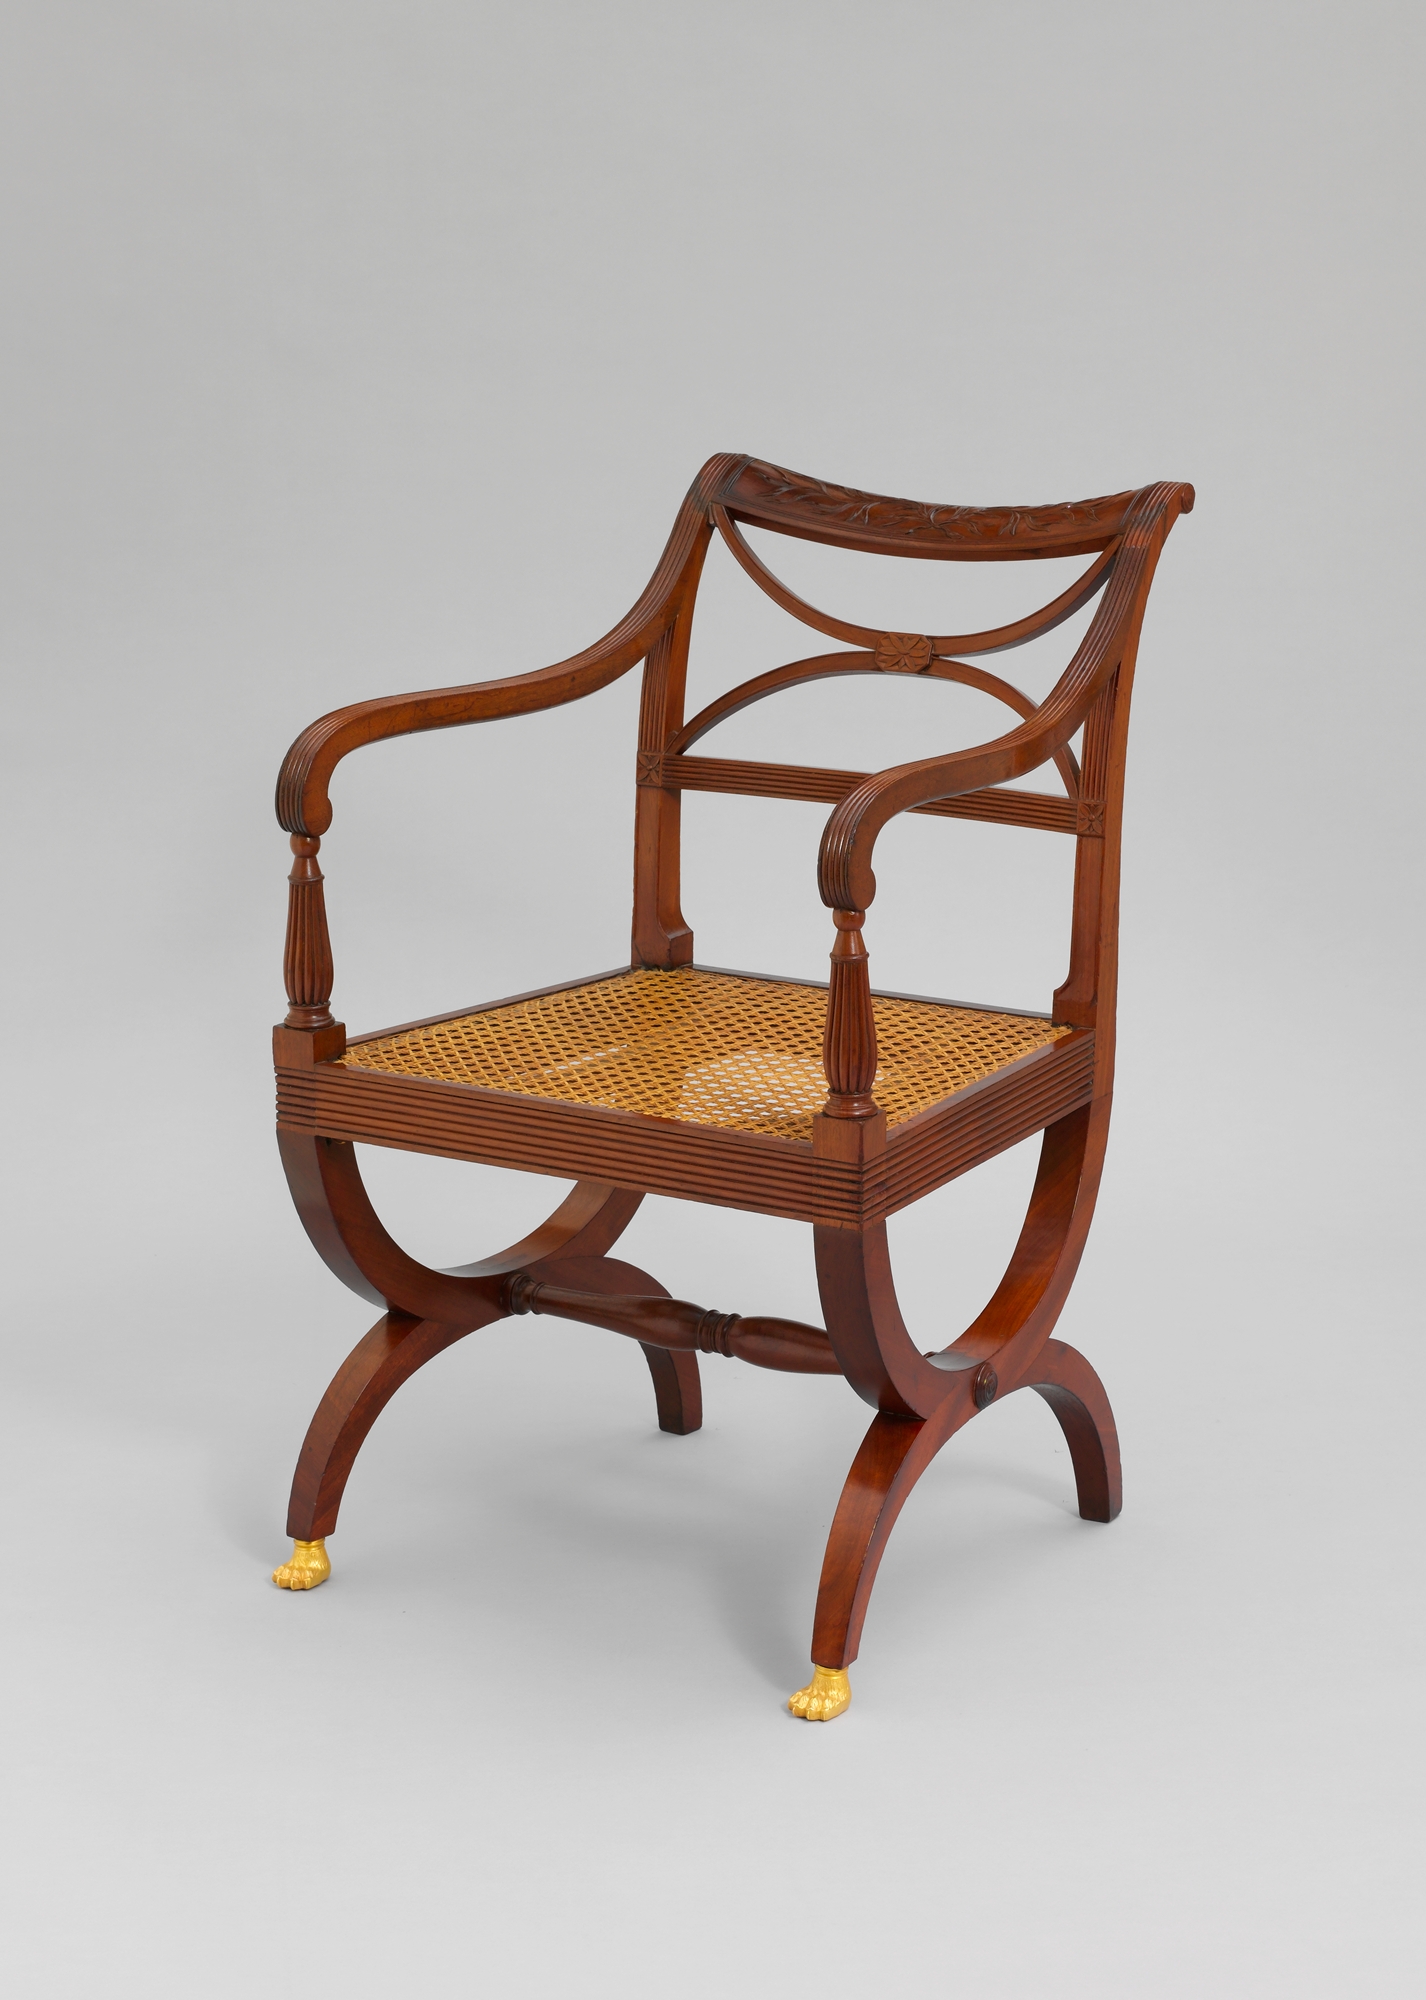 Attributed to Duncan Phyfe | Armchair | American | The Metropolitan Museum of Art